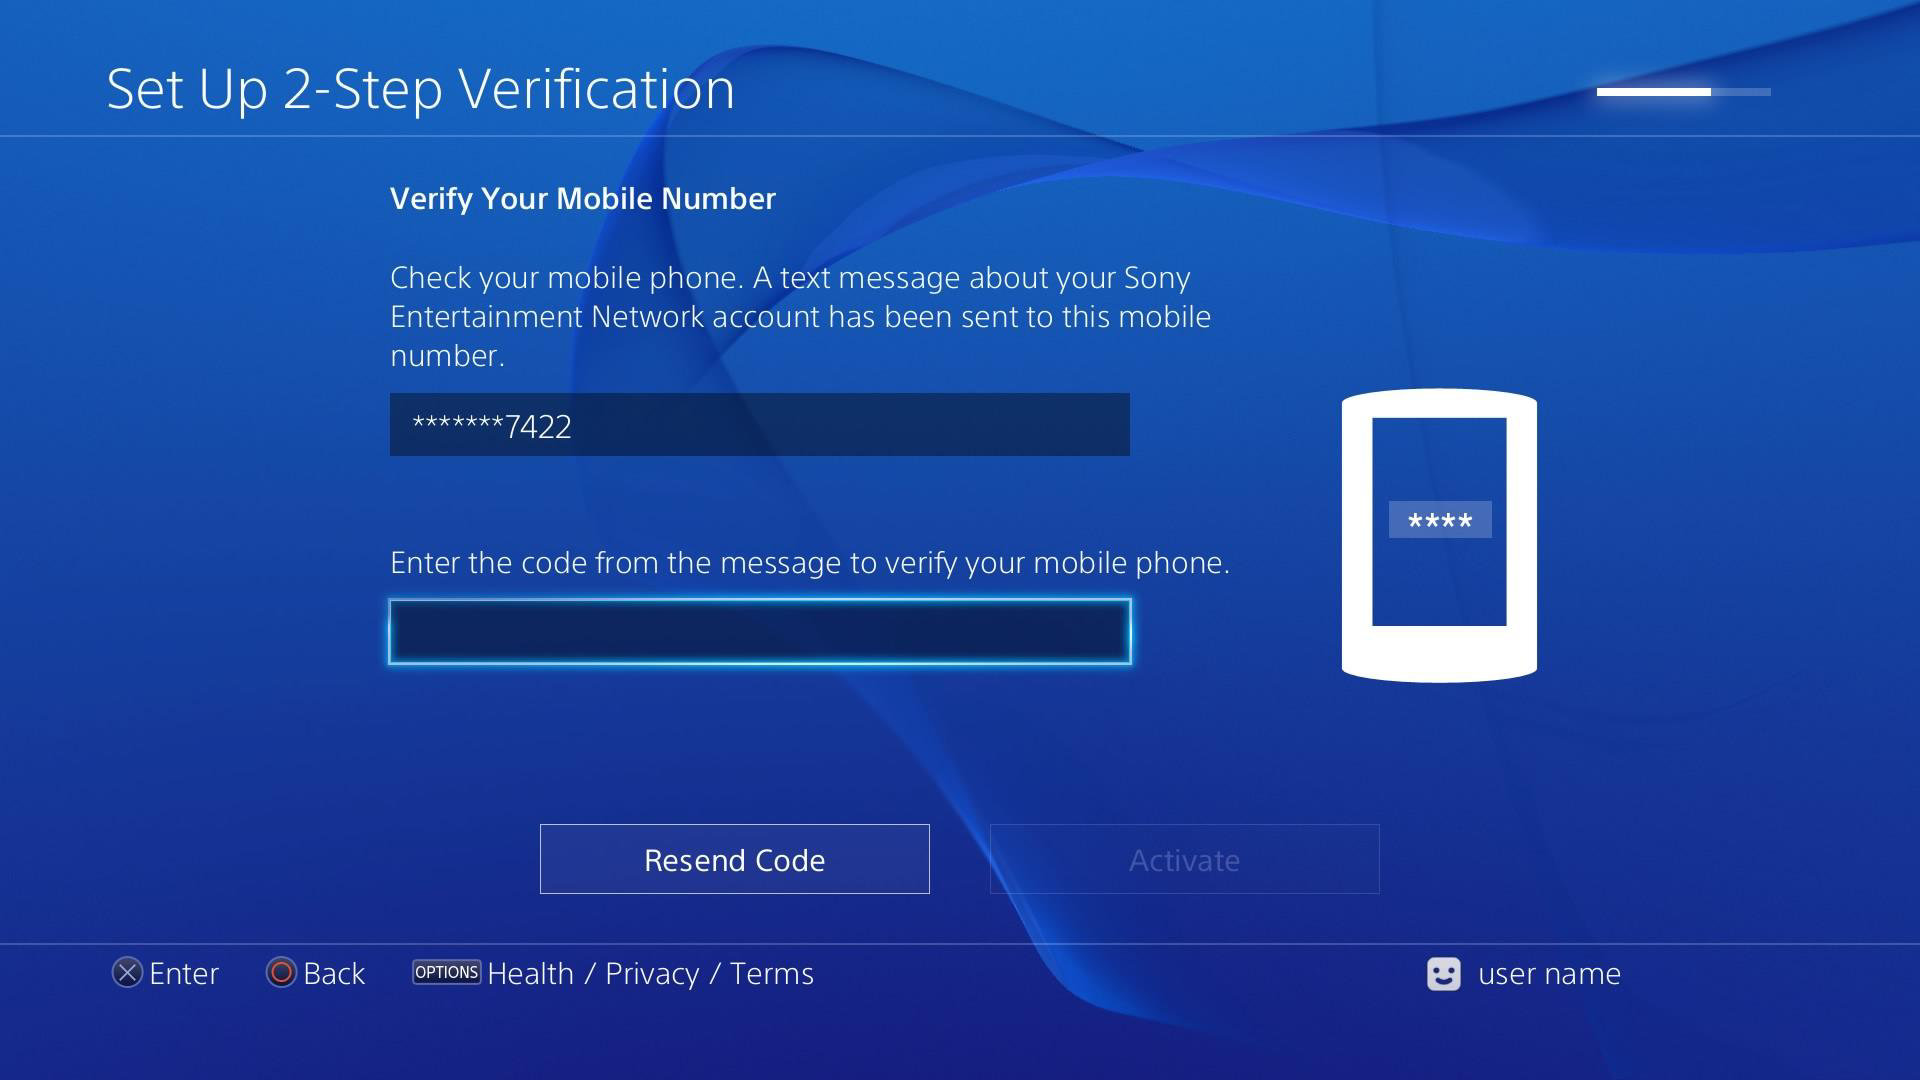 PSN Bans Due to PayPal and it's Aftermath - Hackinformer